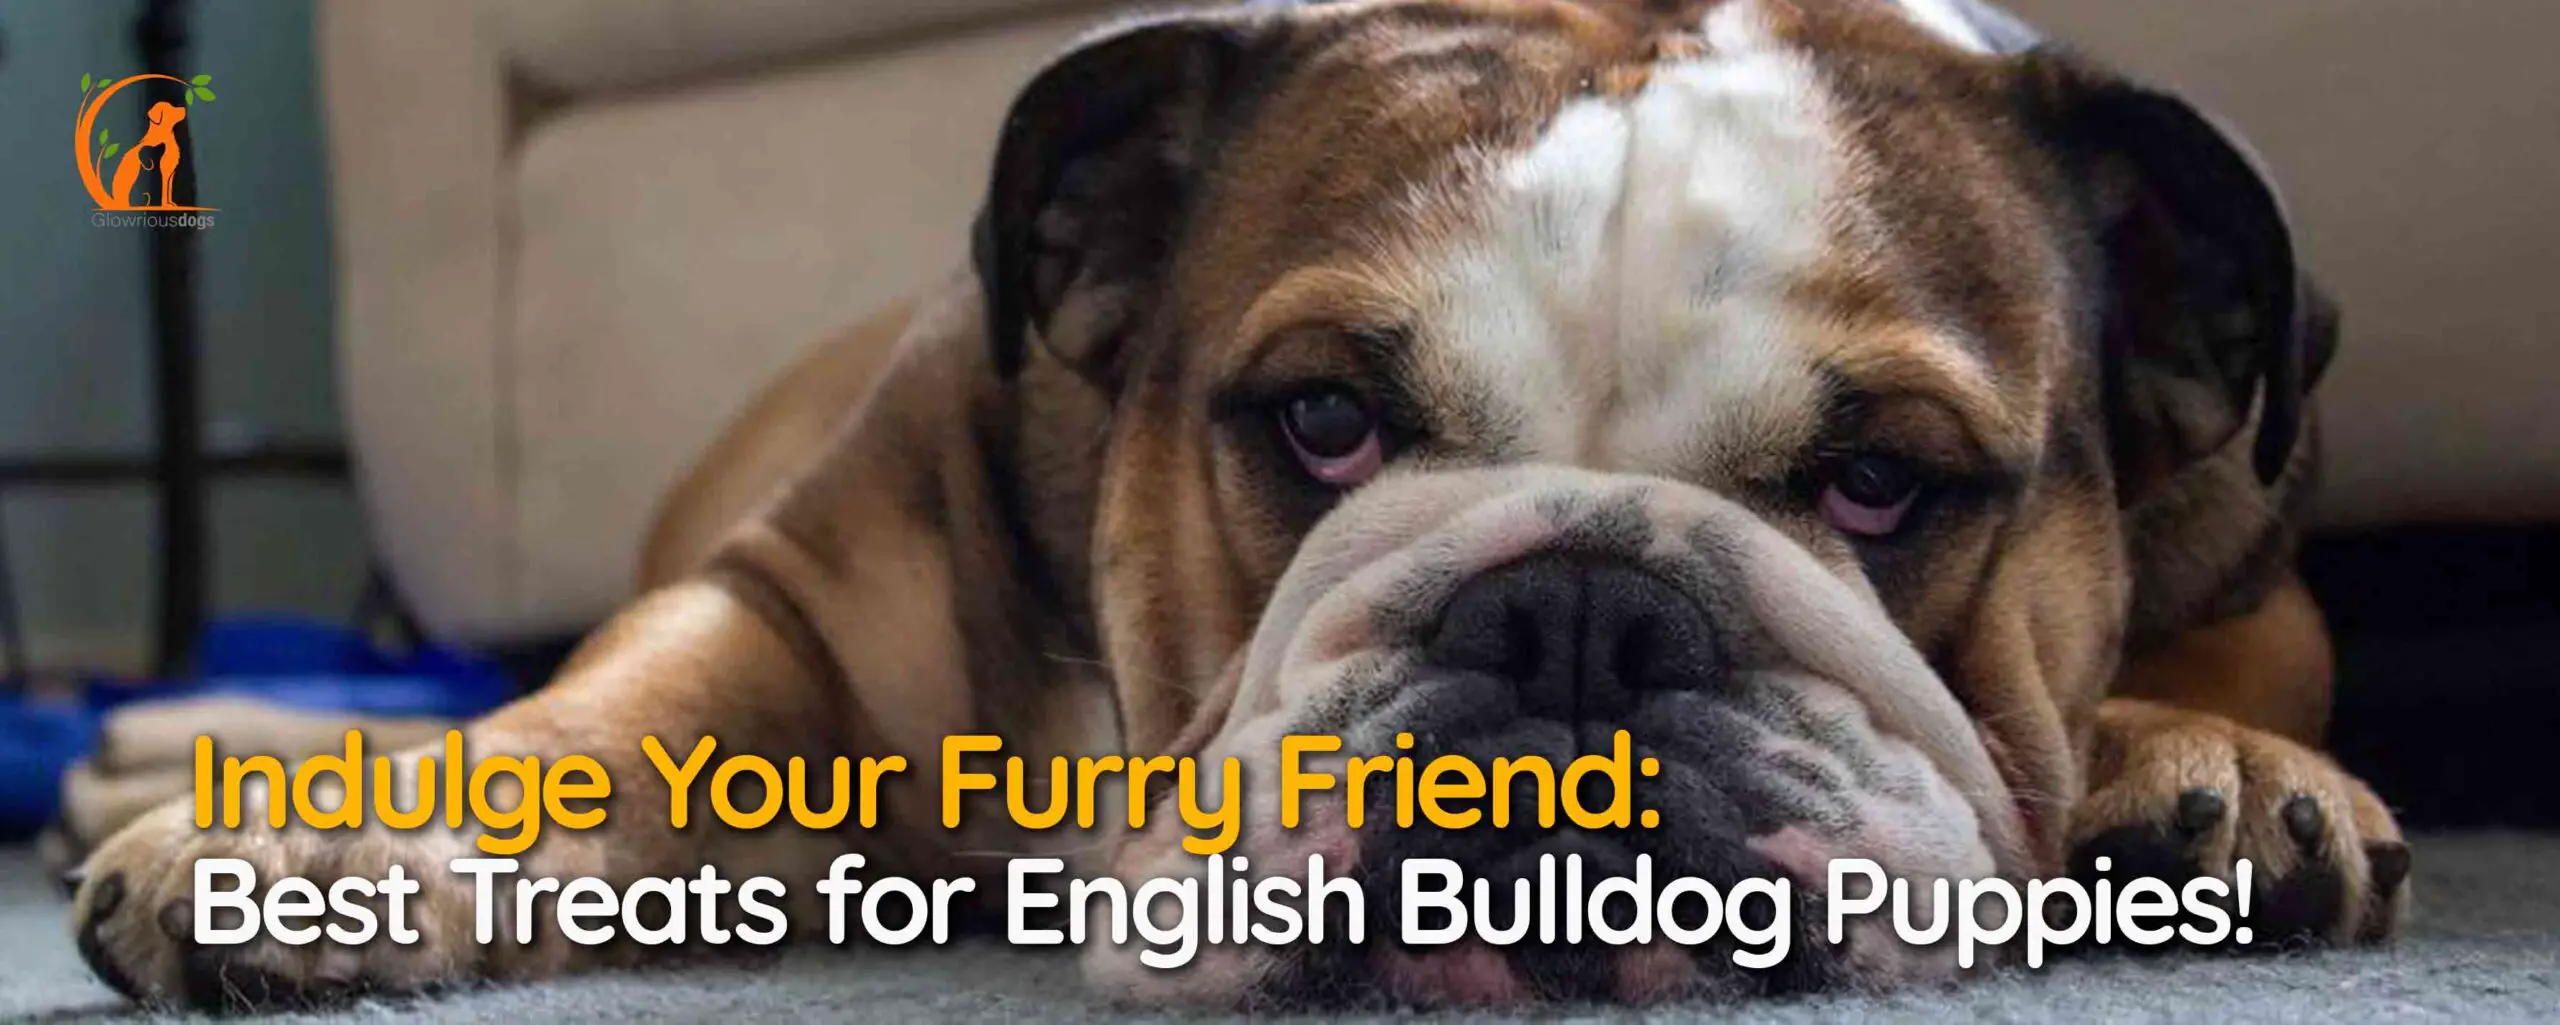 Indulge Your Furry Friend: Best Treats for English Bulldog Puppies!